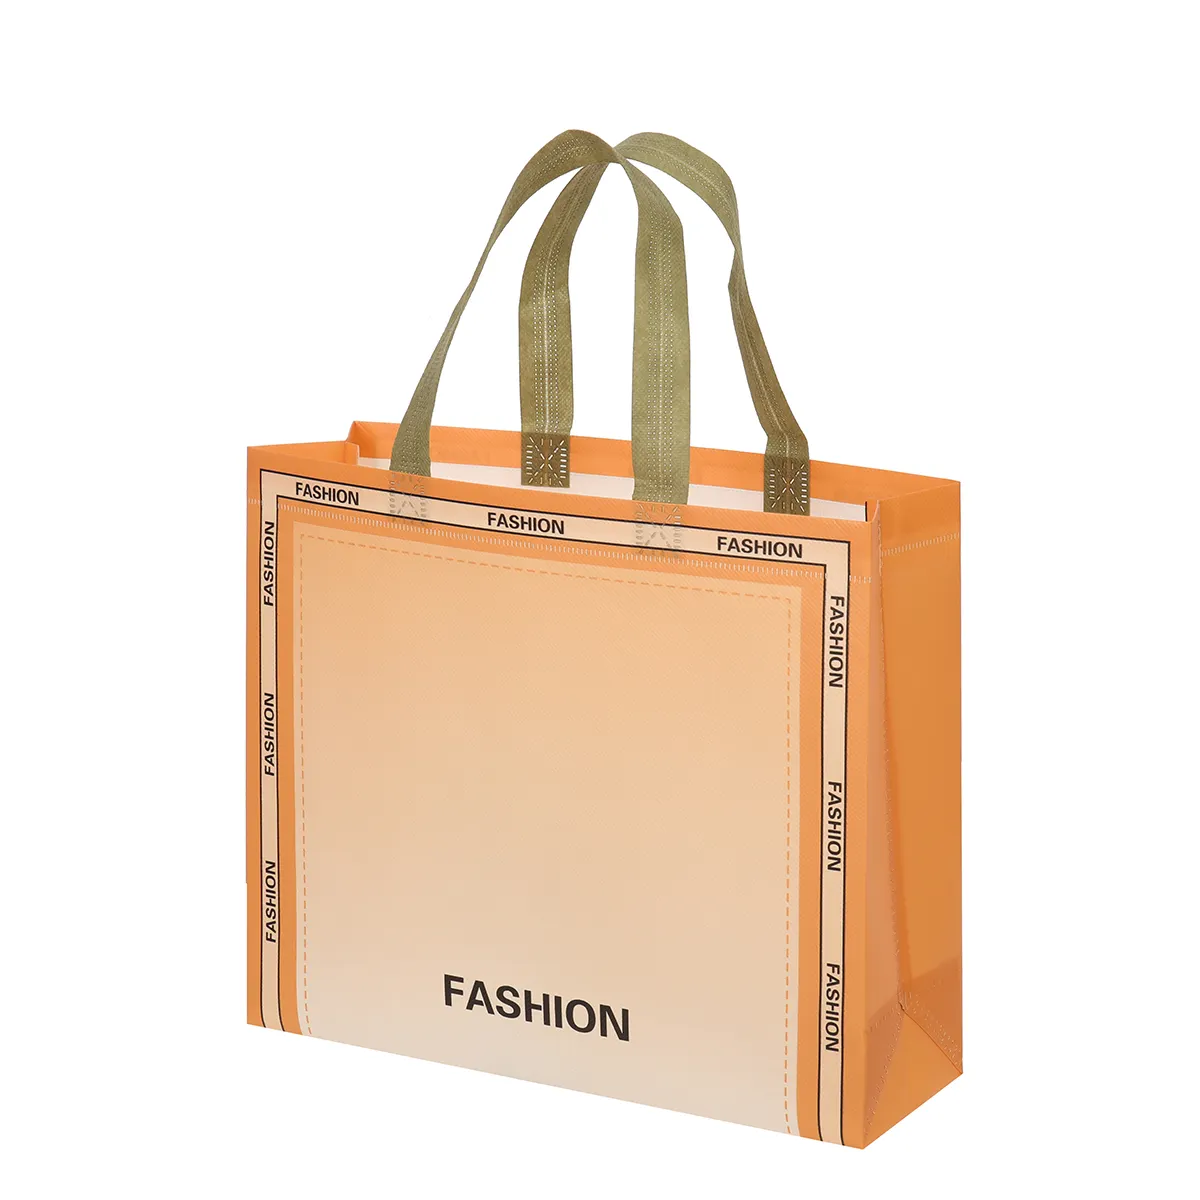 Ruicheng Wholesale Tote Non Woven Bag with Zipper Promotional Tote Shopping Reusable Bag